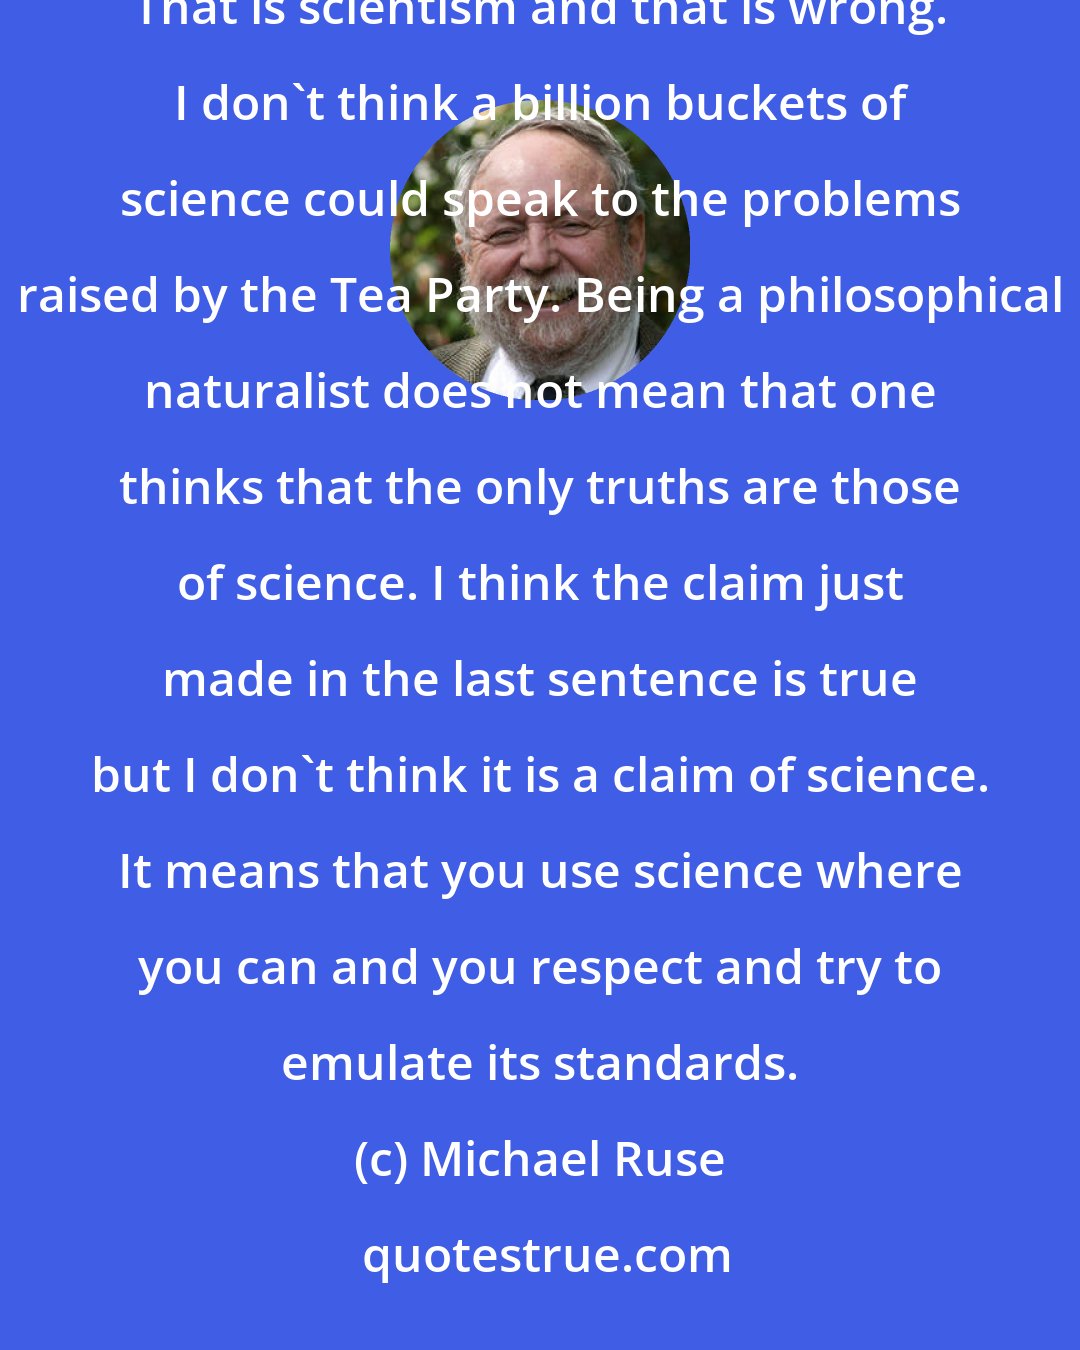 Michael Ruse: Being a philosophical naturalist does not mean that one thinks that science can provide all of the answers. That is scientism and that is wrong. I don't think a billion buckets of science could speak to the problems raised by the Tea Party. Being a philosophical naturalist does not mean that one thinks that the only truths are those of science. I think the claim just made in the last sentence is true but I don't think it is a claim of science. It means that you use science where you can and you respect and try to emulate its standards.